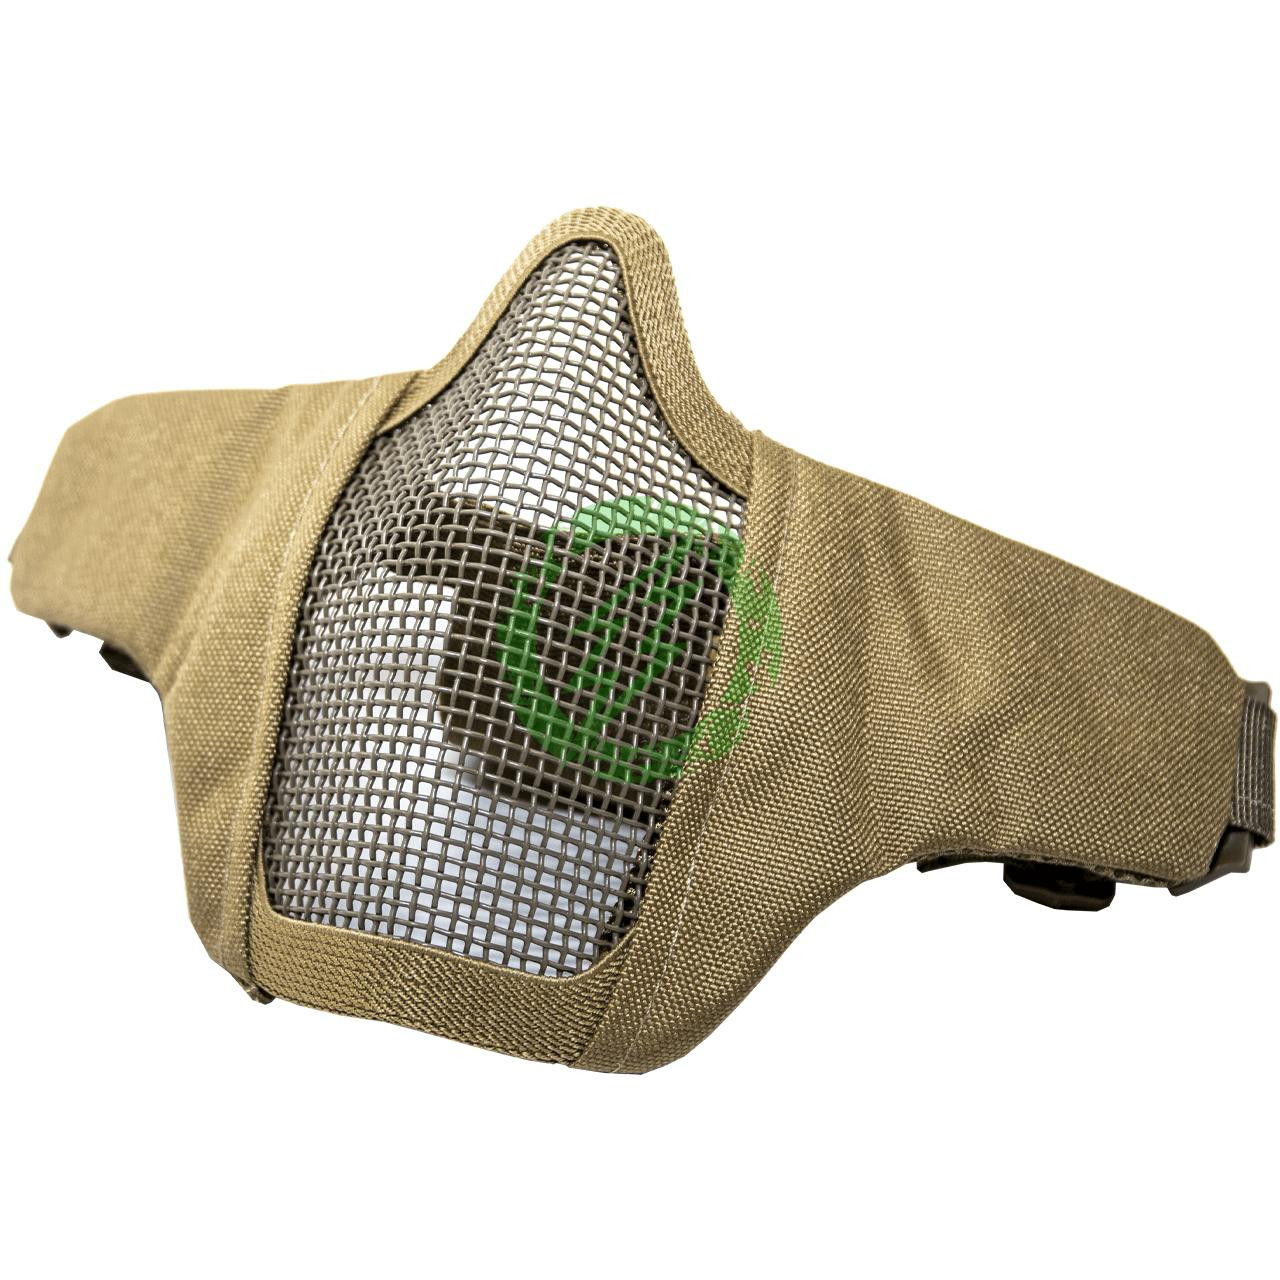  Emerson Gear Low Profile Iron Padded Lower Half Face Mask 